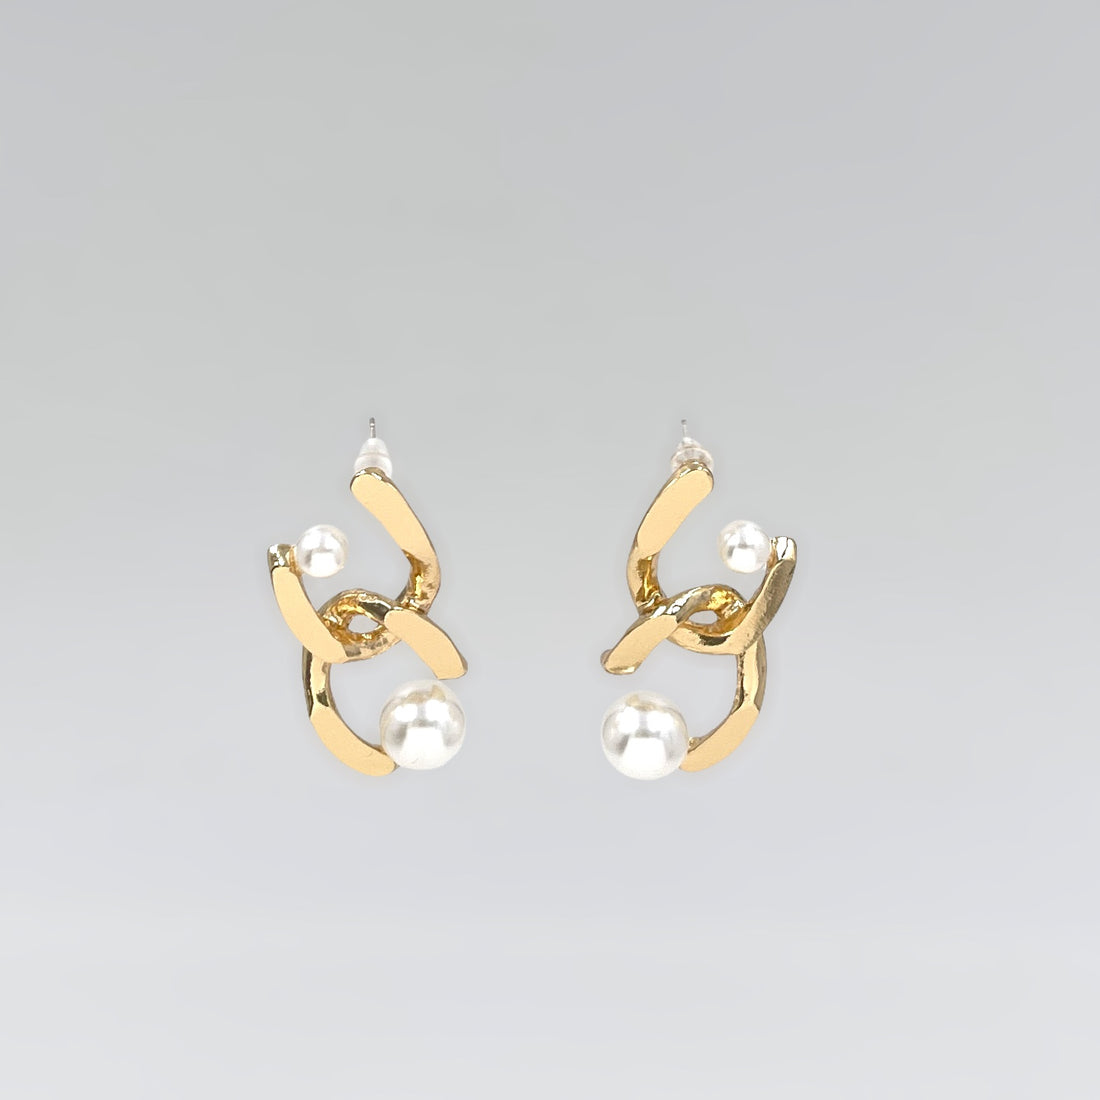 gold chain s925 sterling silver post earrings with faux pearl details